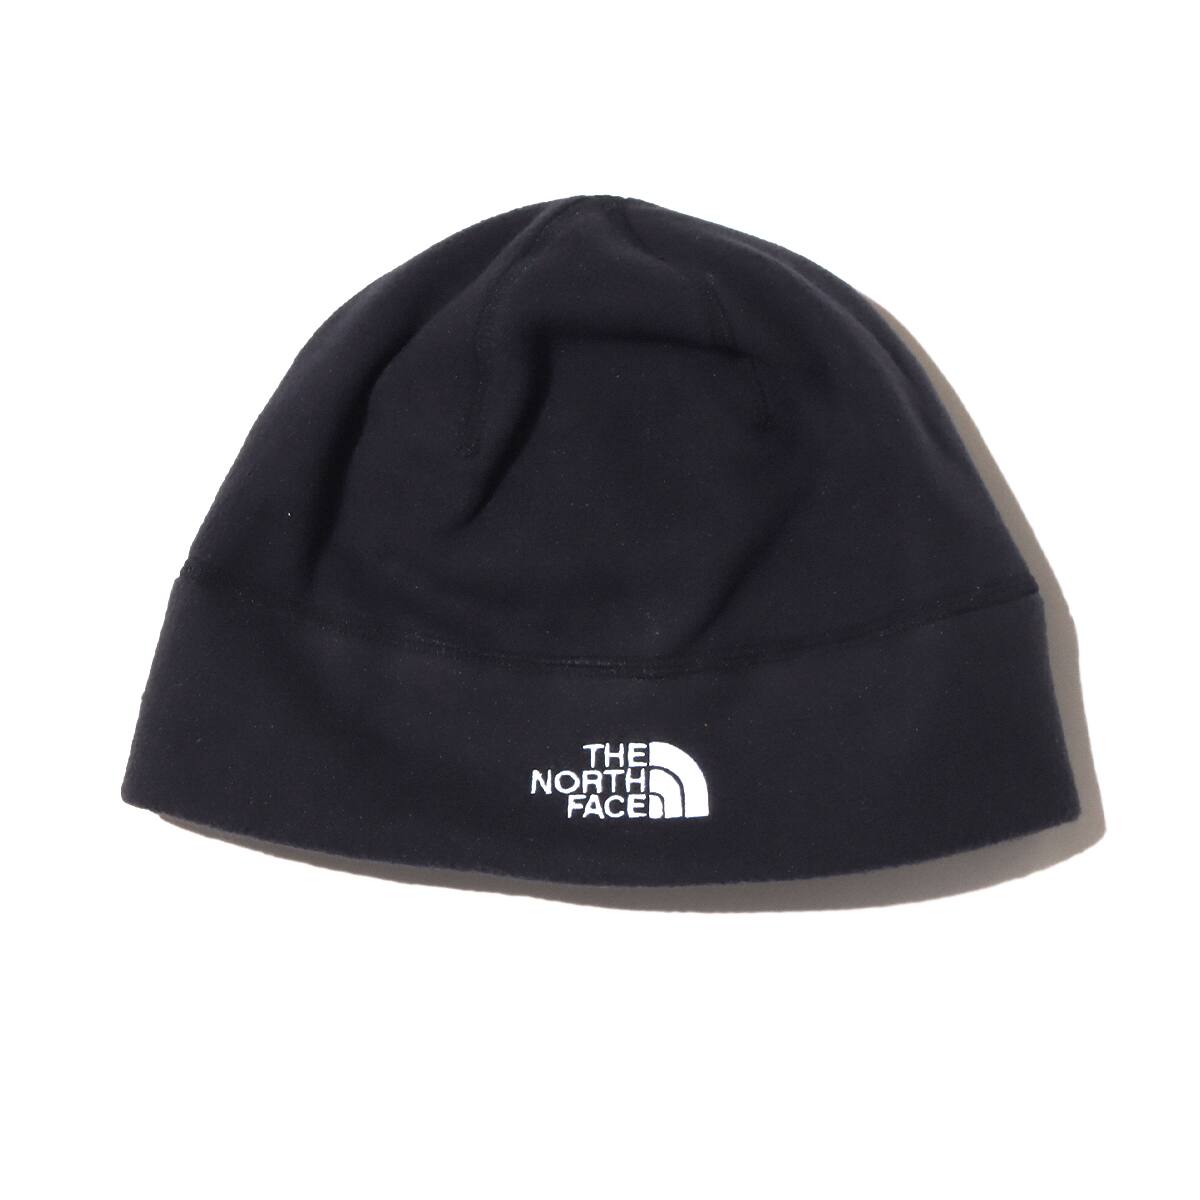 Disability Morning exercises Extraordinary THE NORTH FACE VERSA BEANIE ブラック 22FW-I